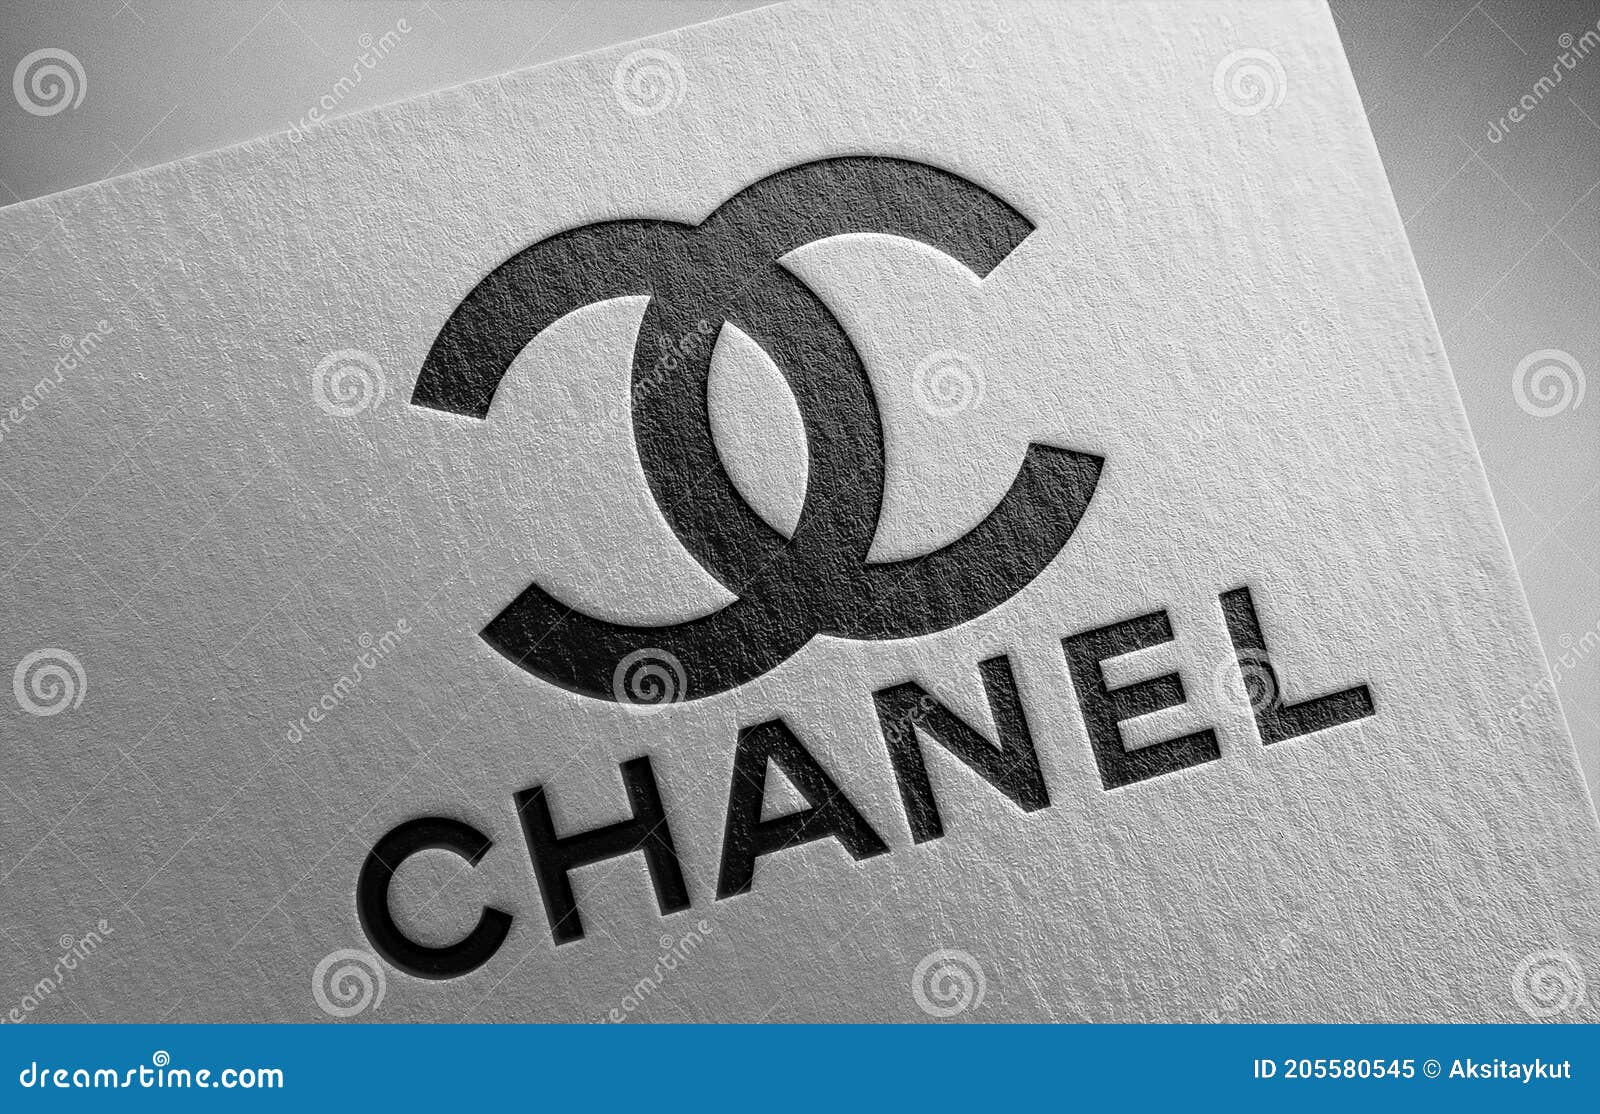 Chanel-2_1 on Paper Texture Editorial Image - Image of company, alain:  205580545